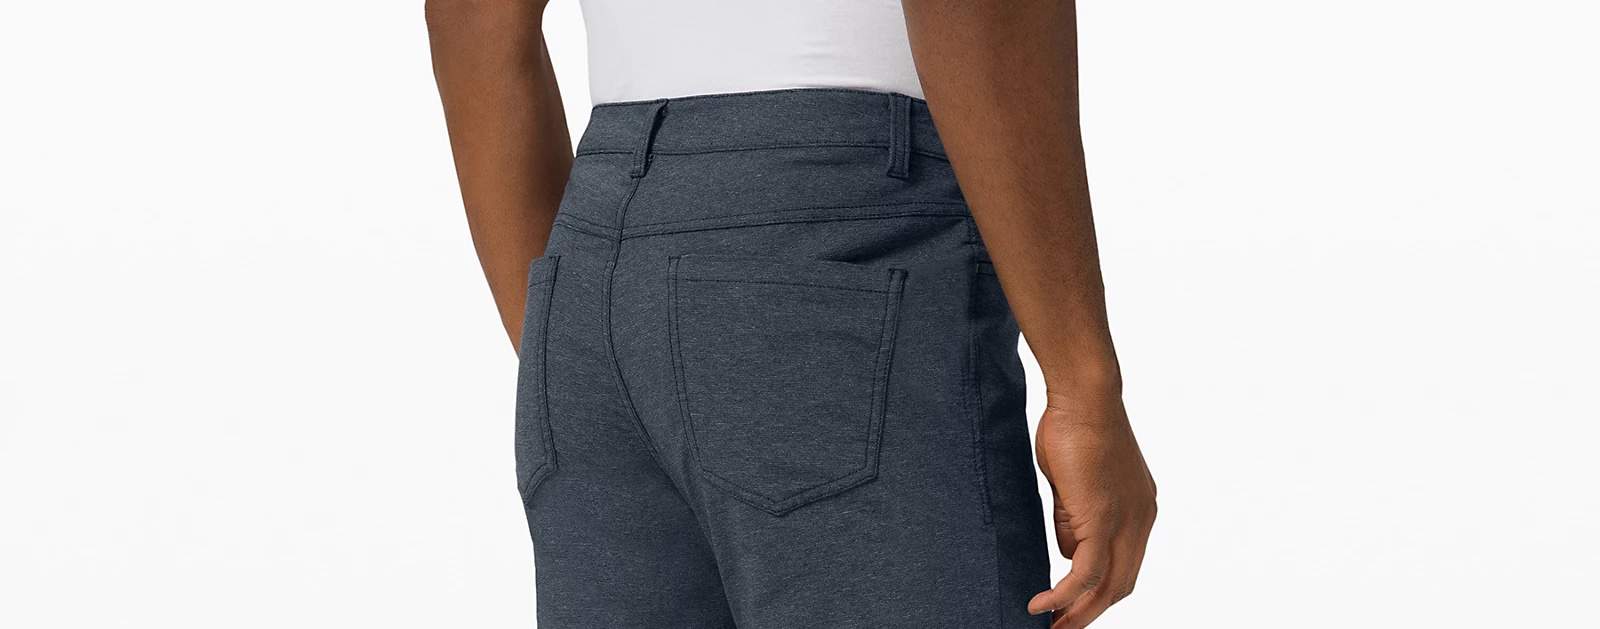 ABC Pant Review - God's gift to men? Or expensive marketing gimmick? 13